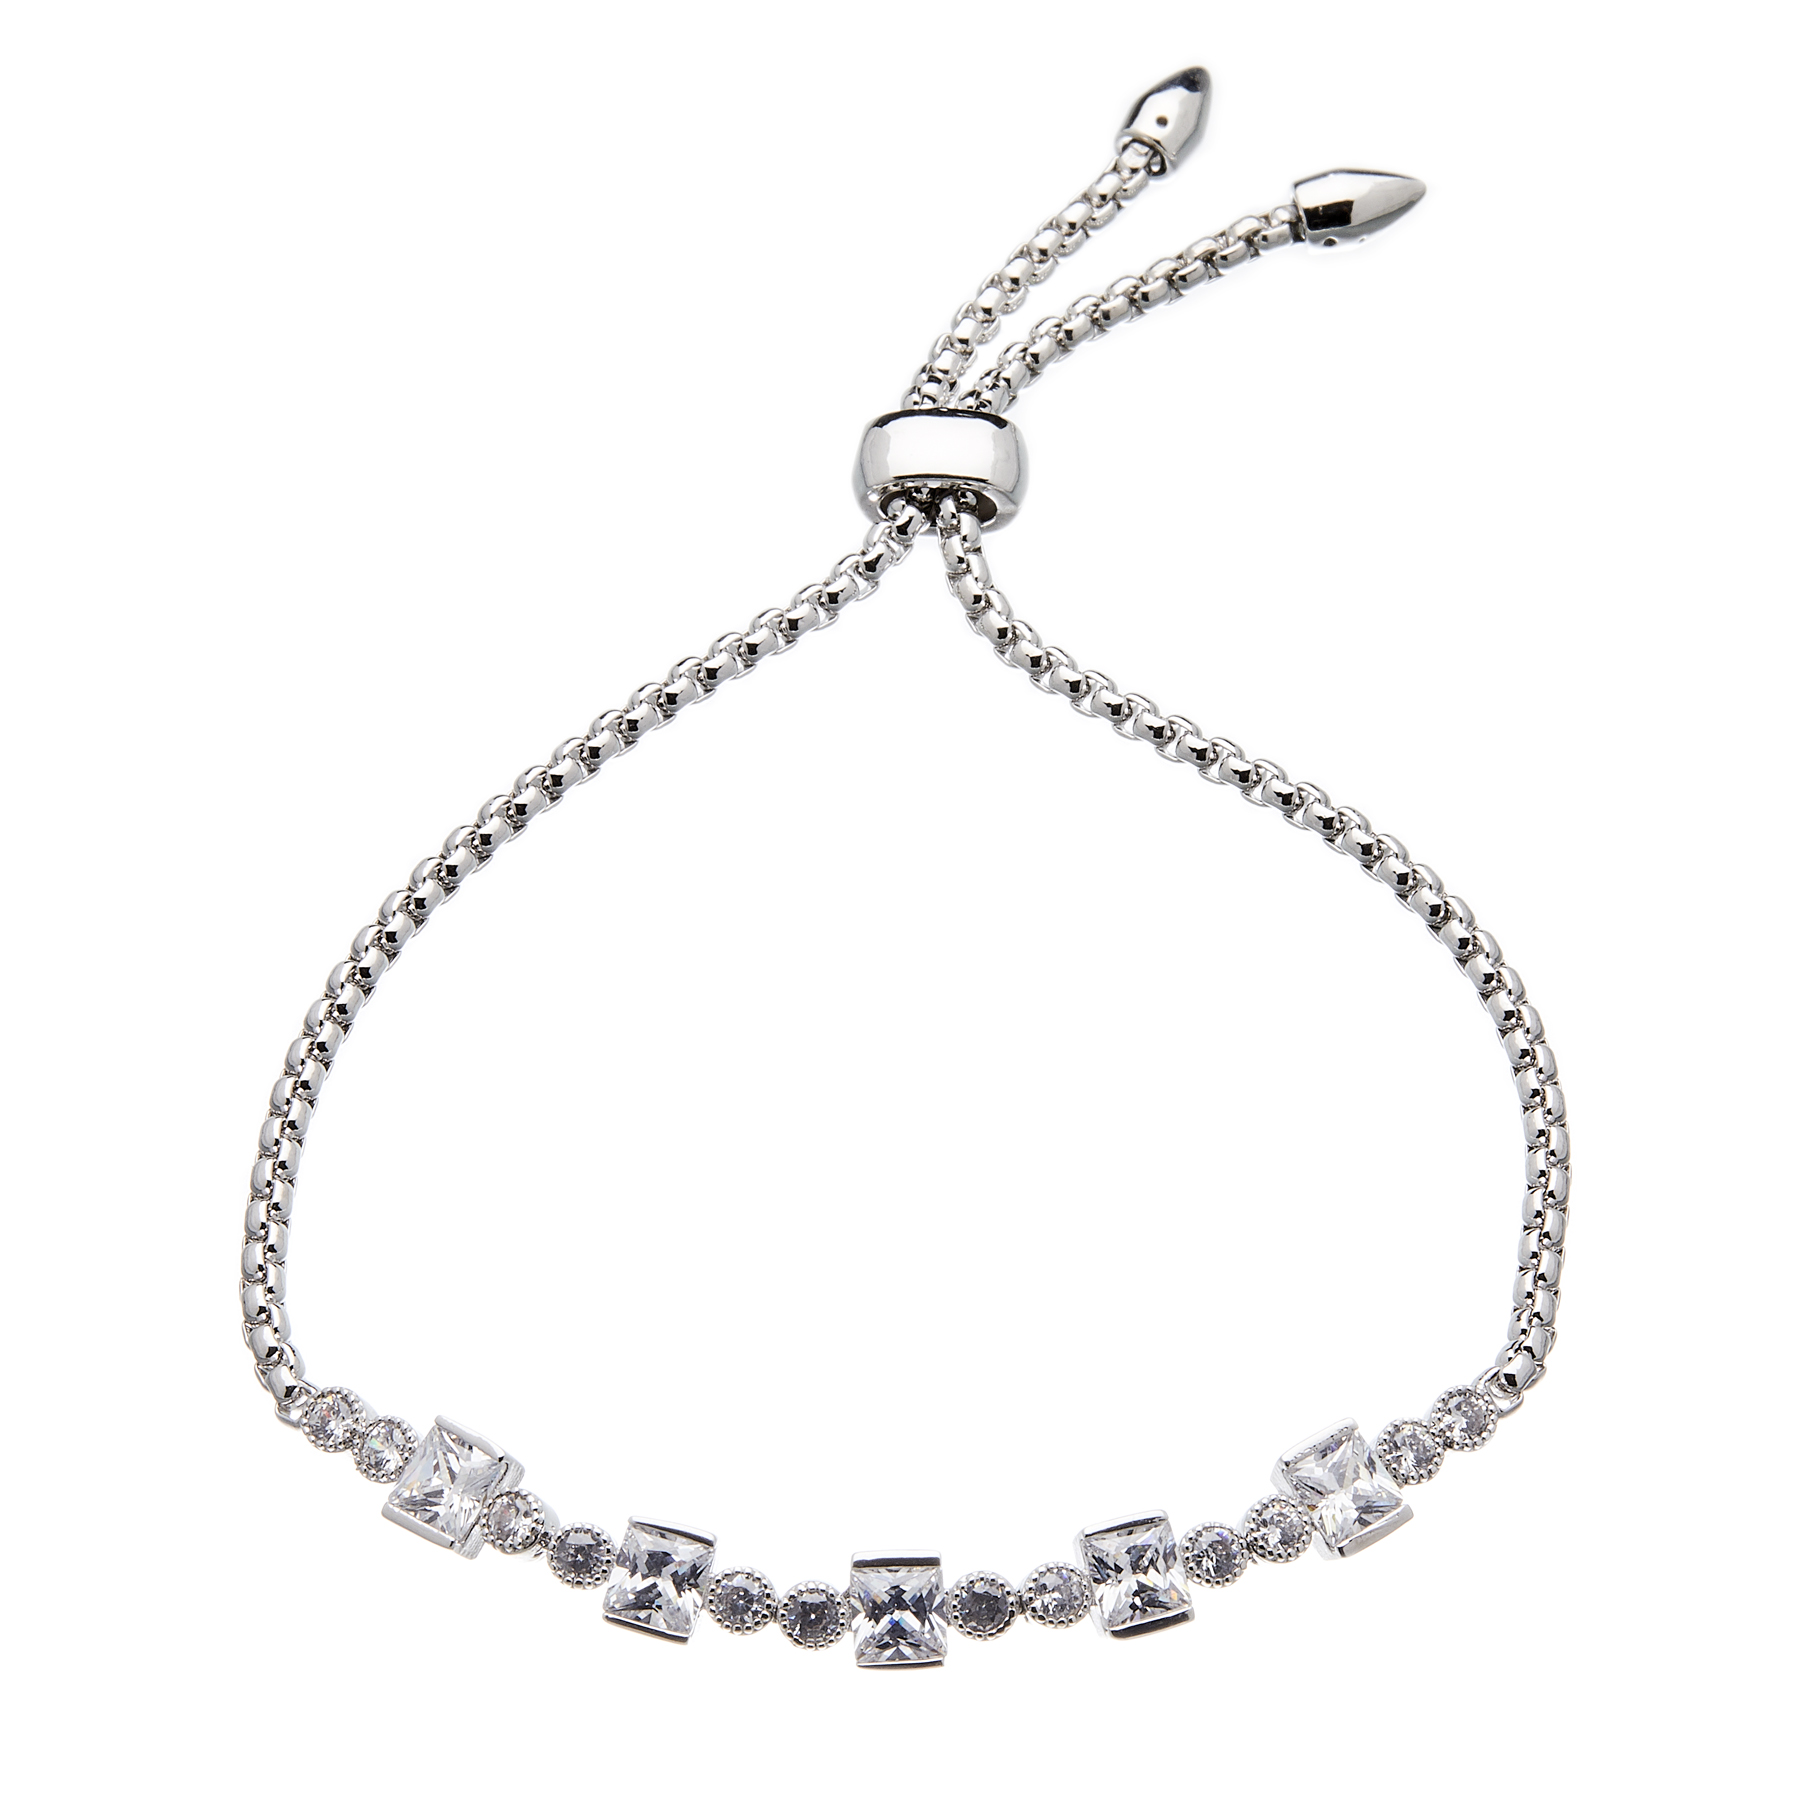 Silver adjustable Bracelet with square and round crystals - Nin